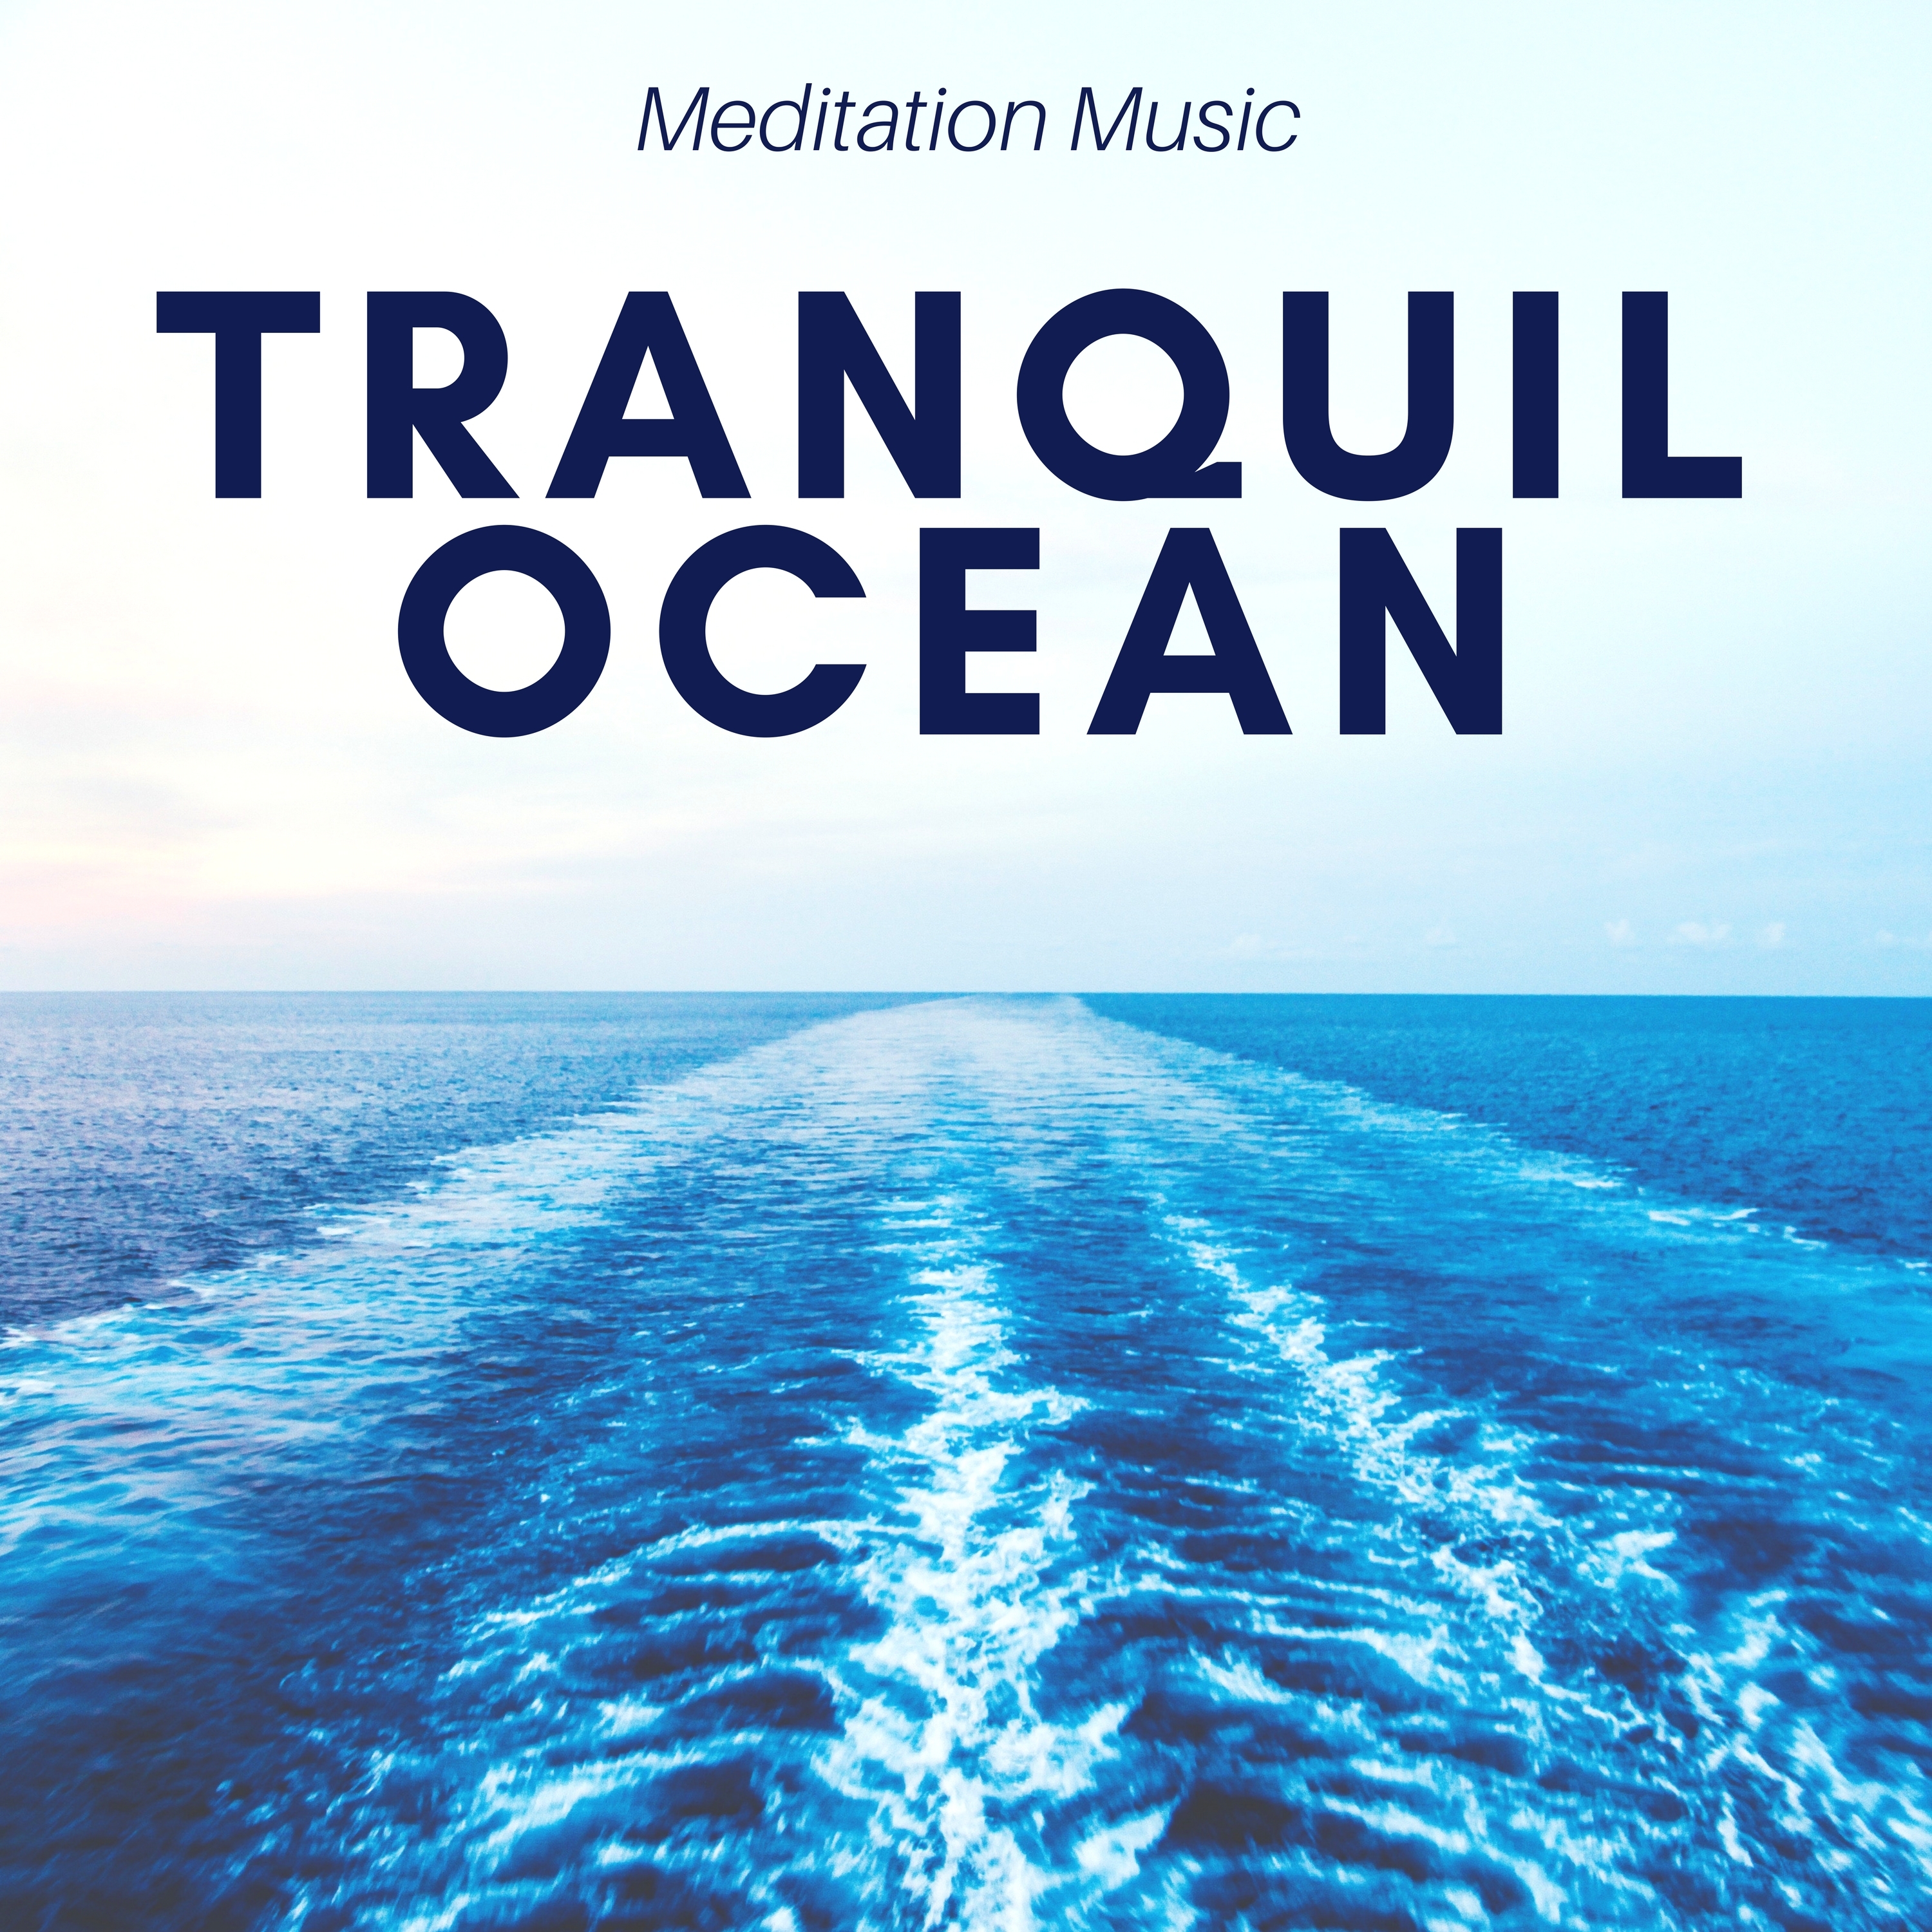 Tranquil Ocean: Meditation Music, Natural Sleep Aid, Nature Sounds, Soothing Waves, Mindfulness Exercises, Relaxation